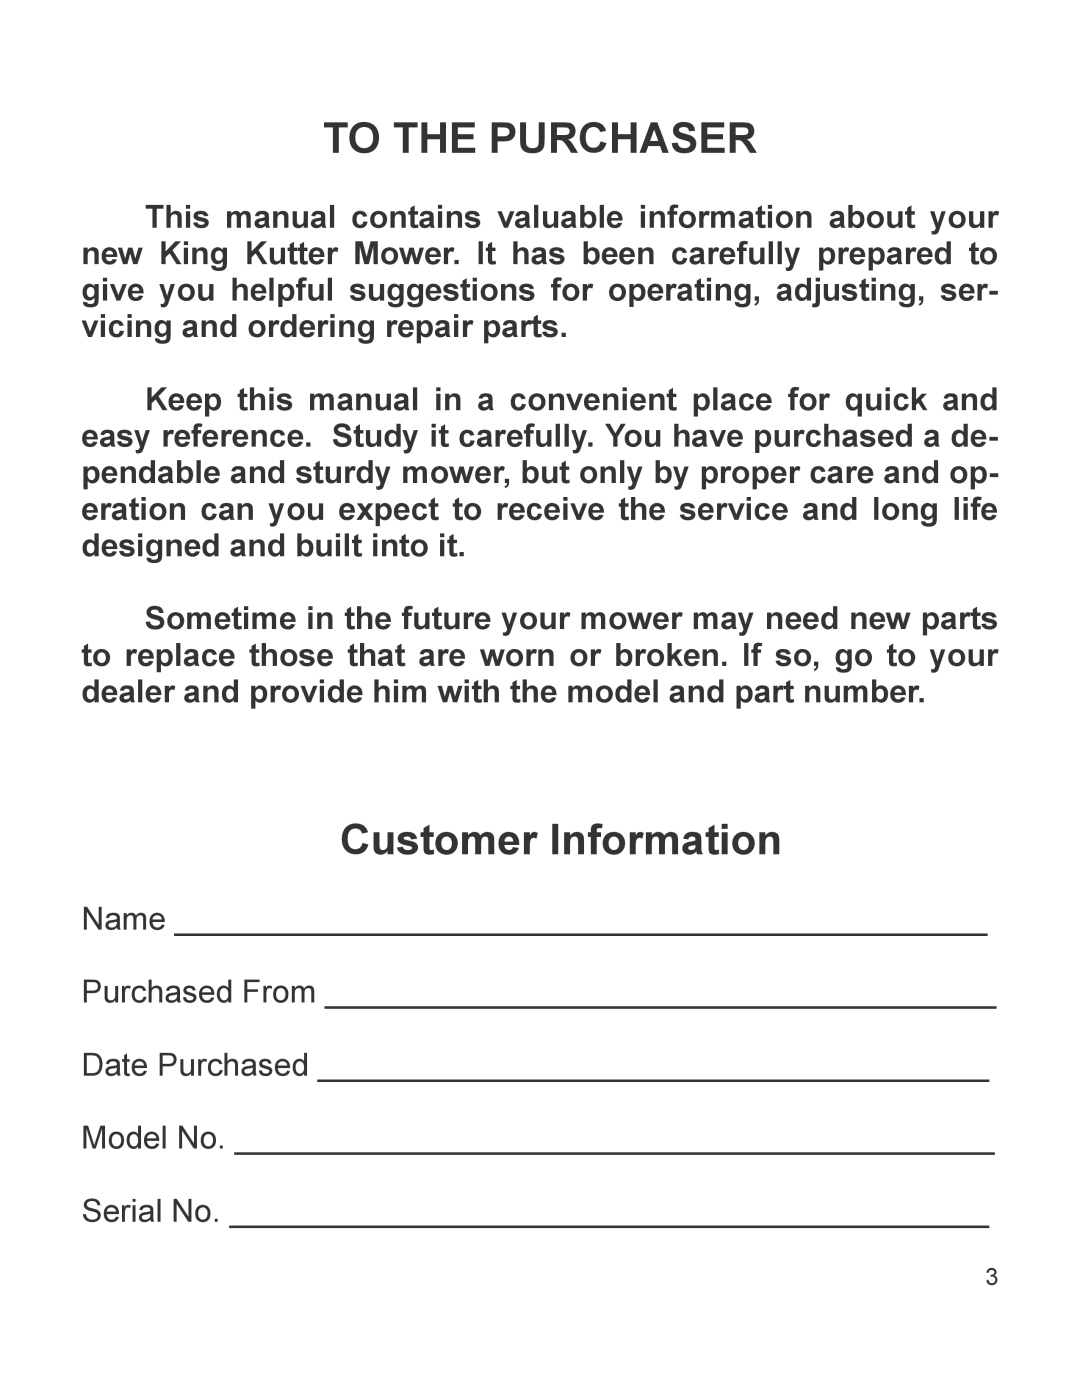 King Kutter 999998 manual To The Purchaser, Customer Information 